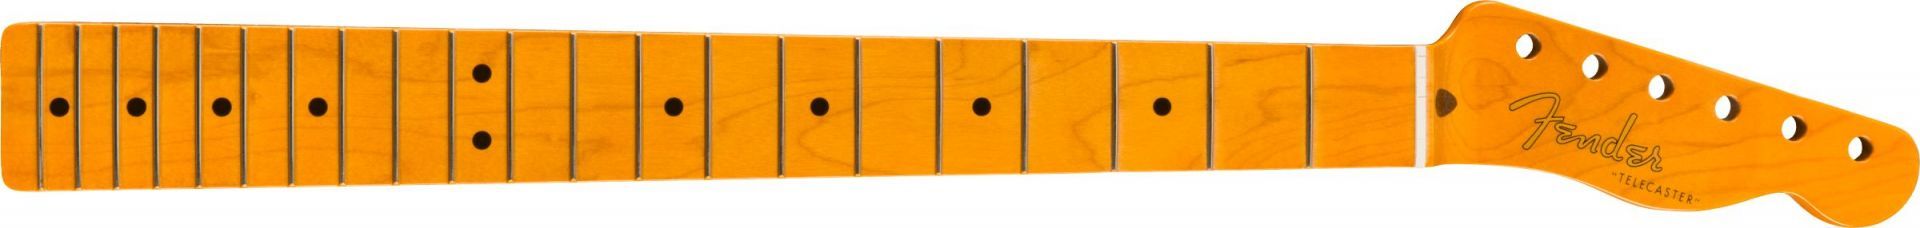 Fender Classic Series 50s Telecaster Neck Lacquer Finish 21 Vintage-Style Frets Maple Fingerboard